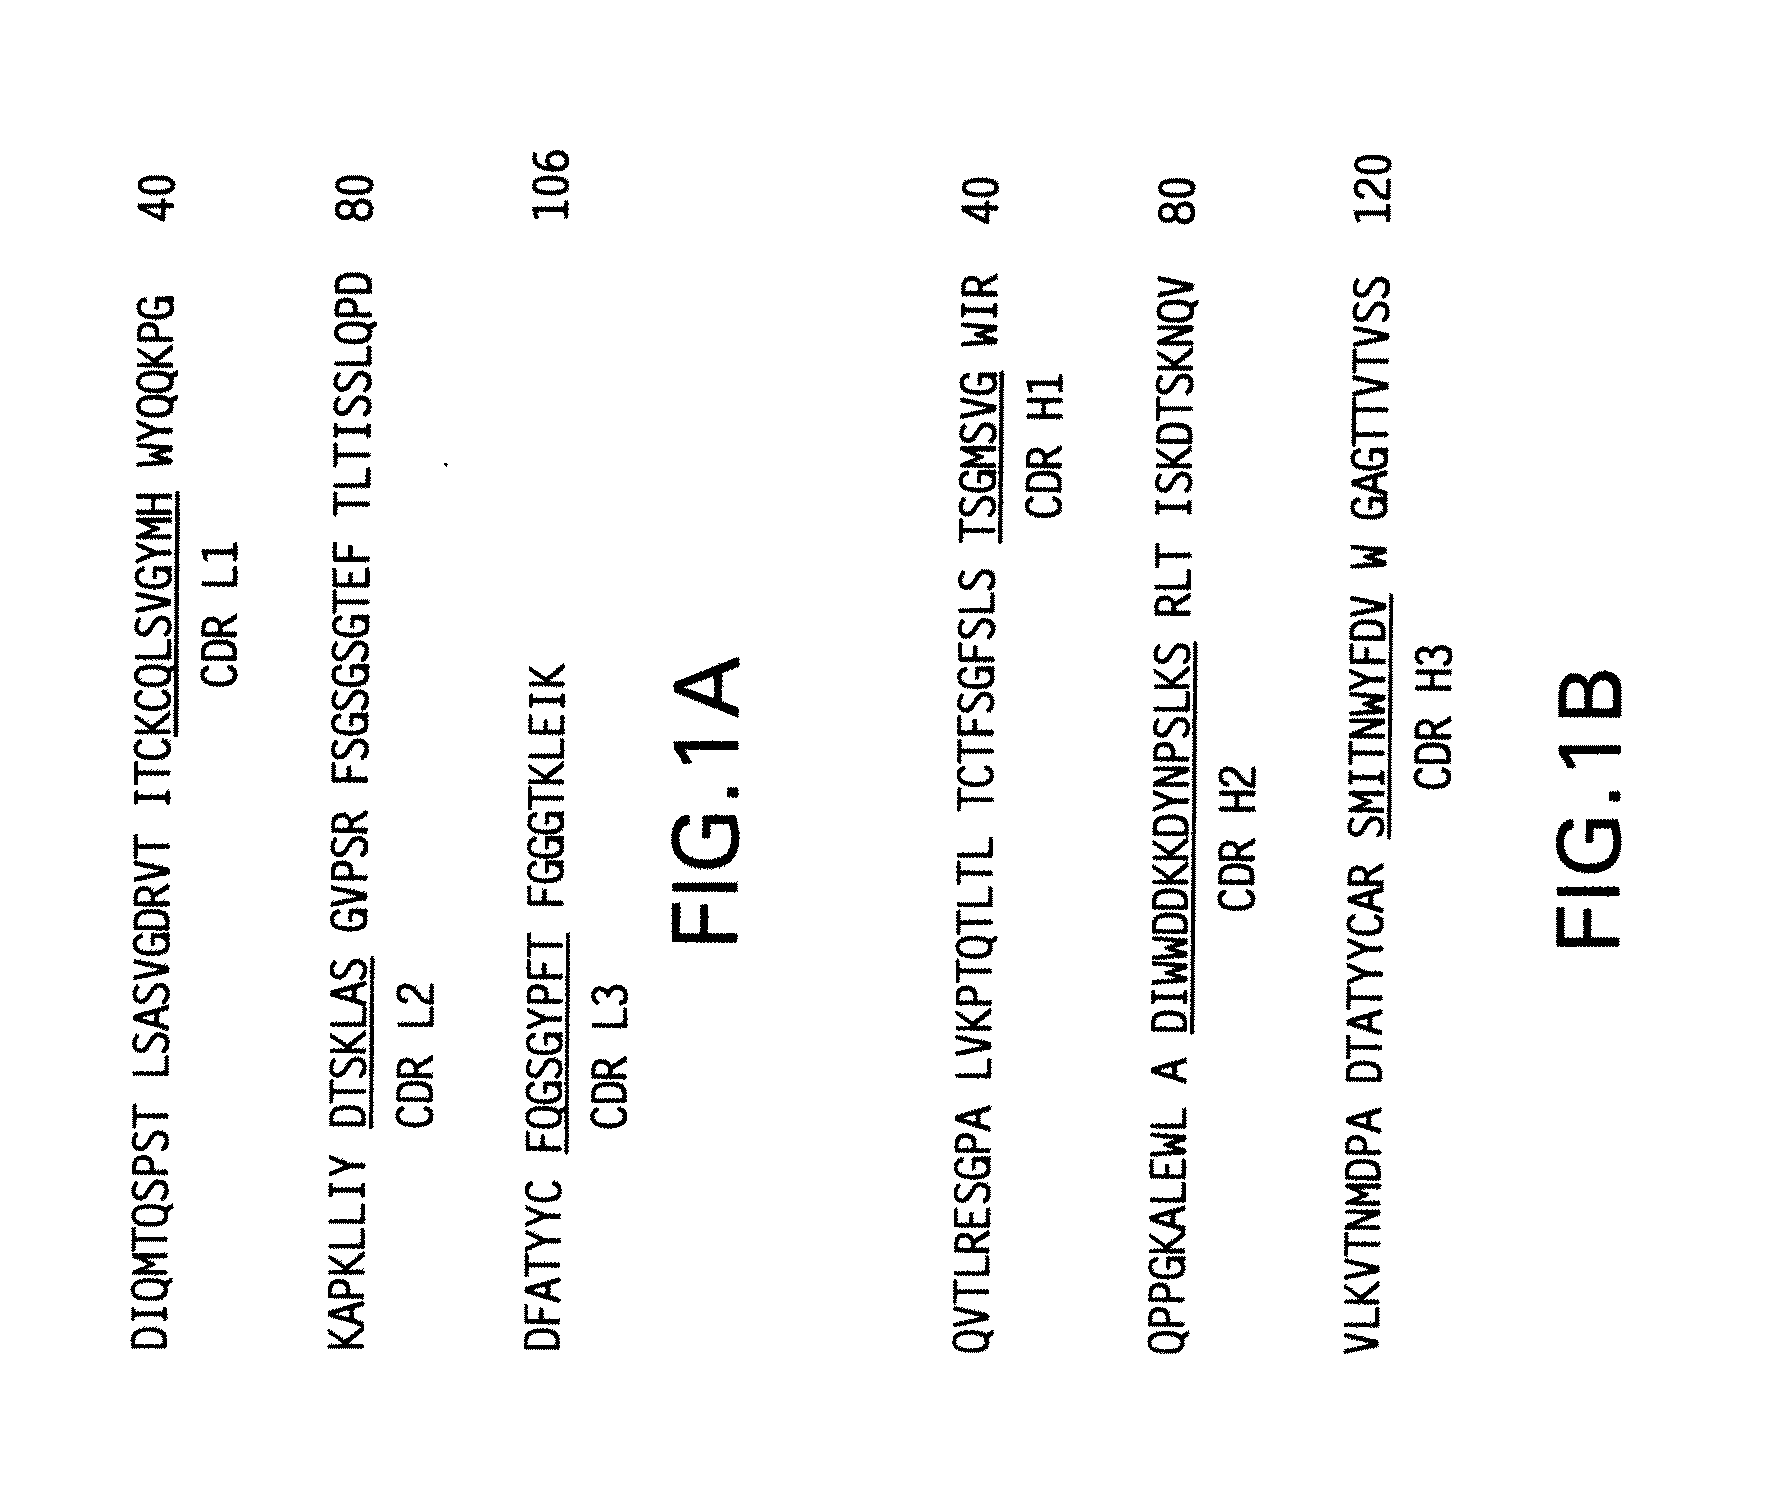 Methods of preventing and treating rsv infections and related conditions